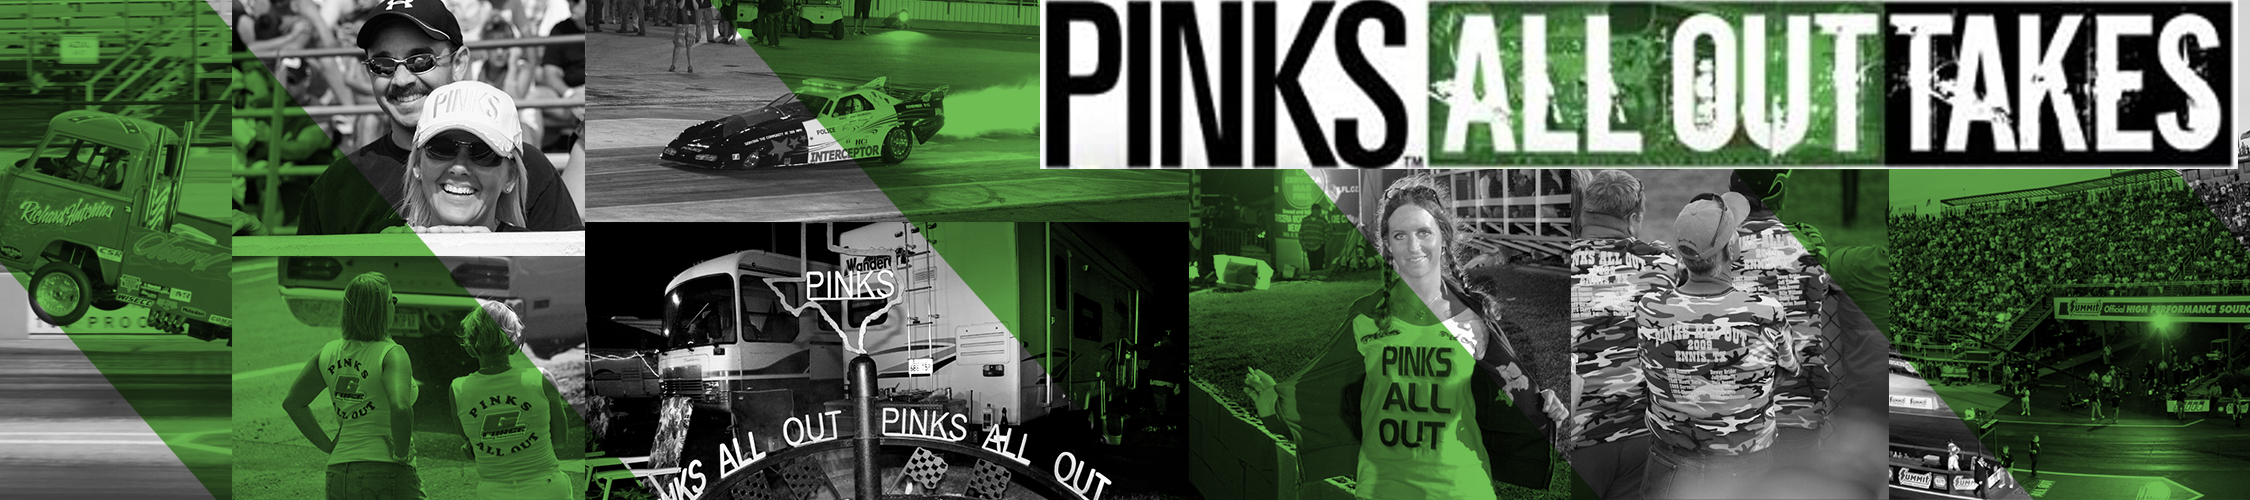 Pinks All Outtakes